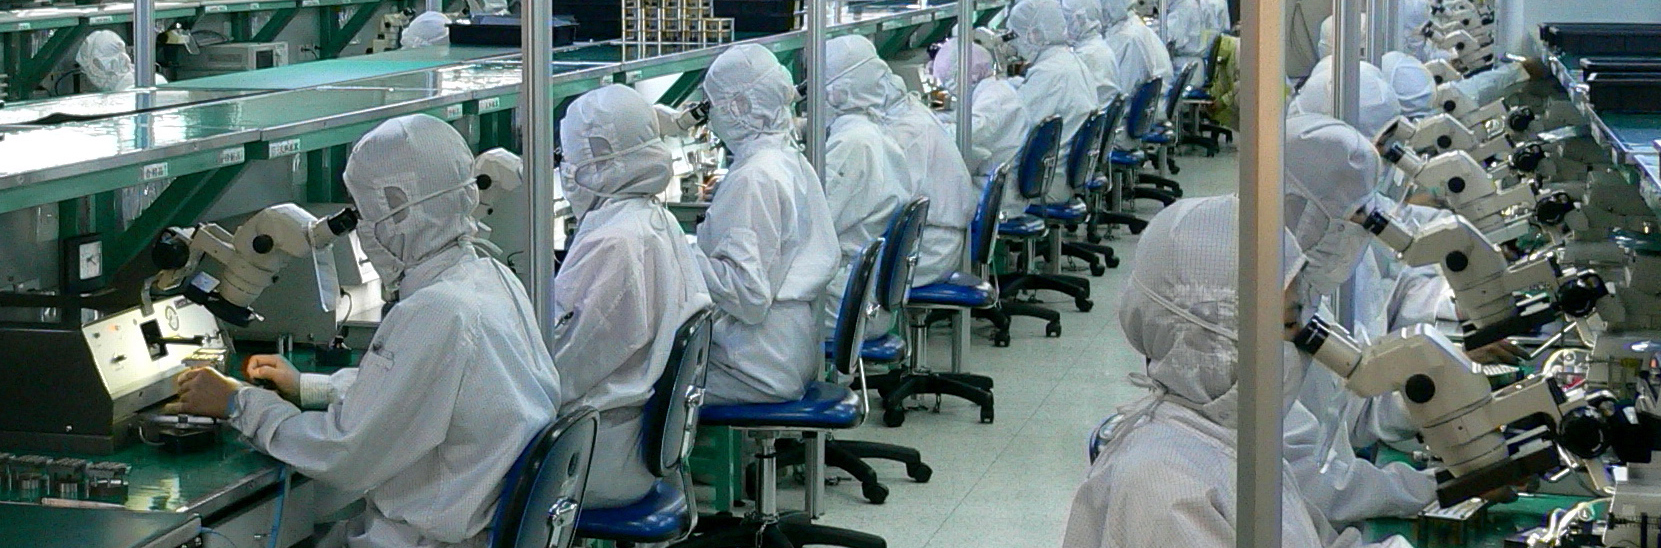 ‘De-Sinicization’ and Manufacturing in China